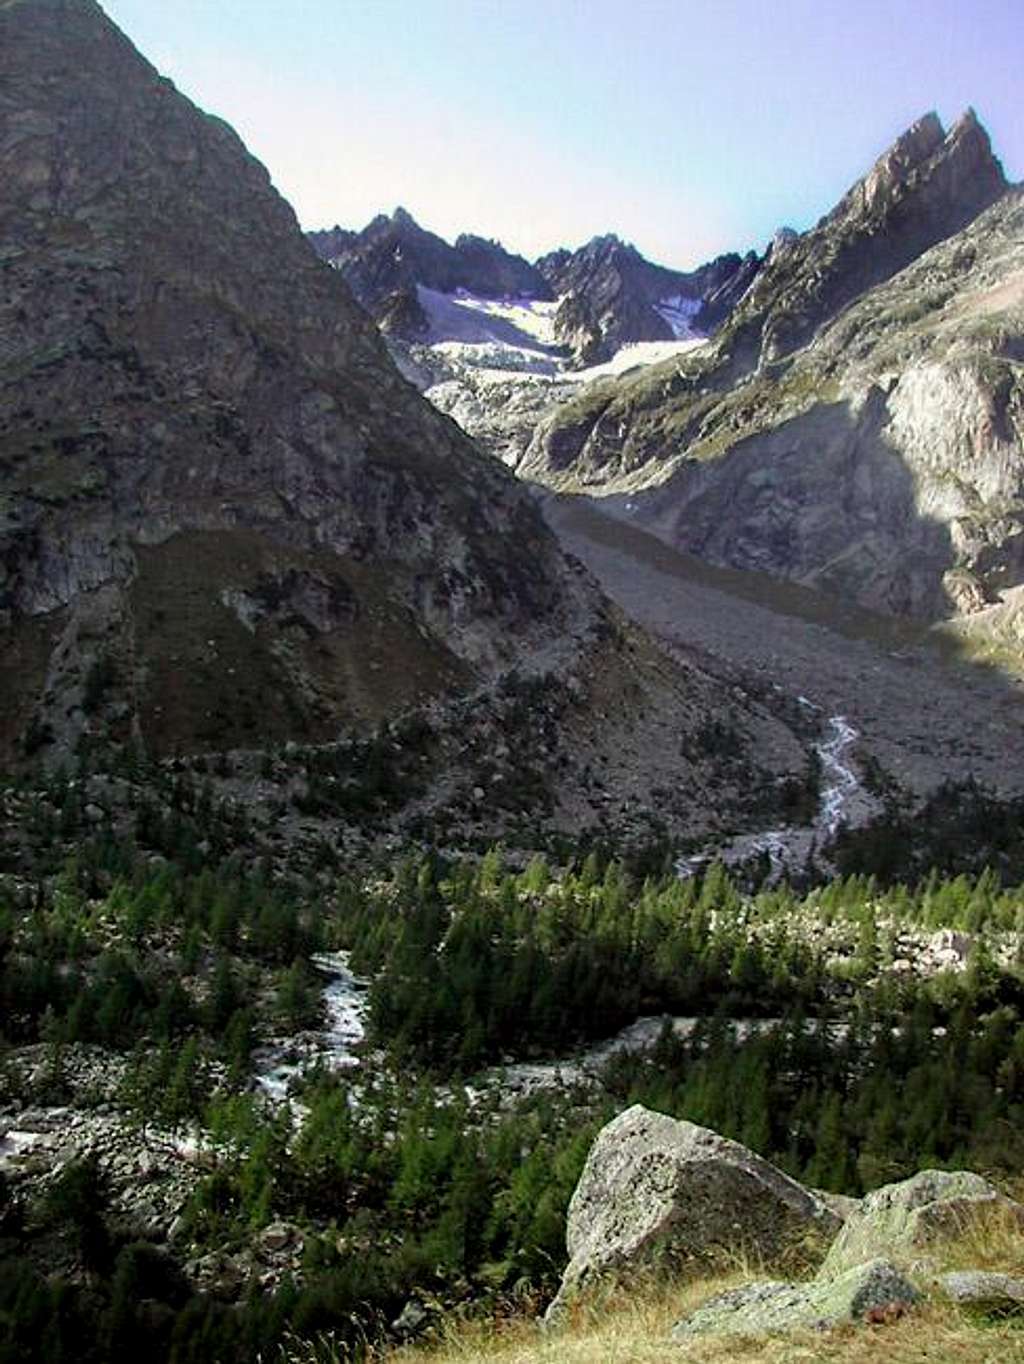  View of Triolet basin from the pathway  above Tsa Djuan